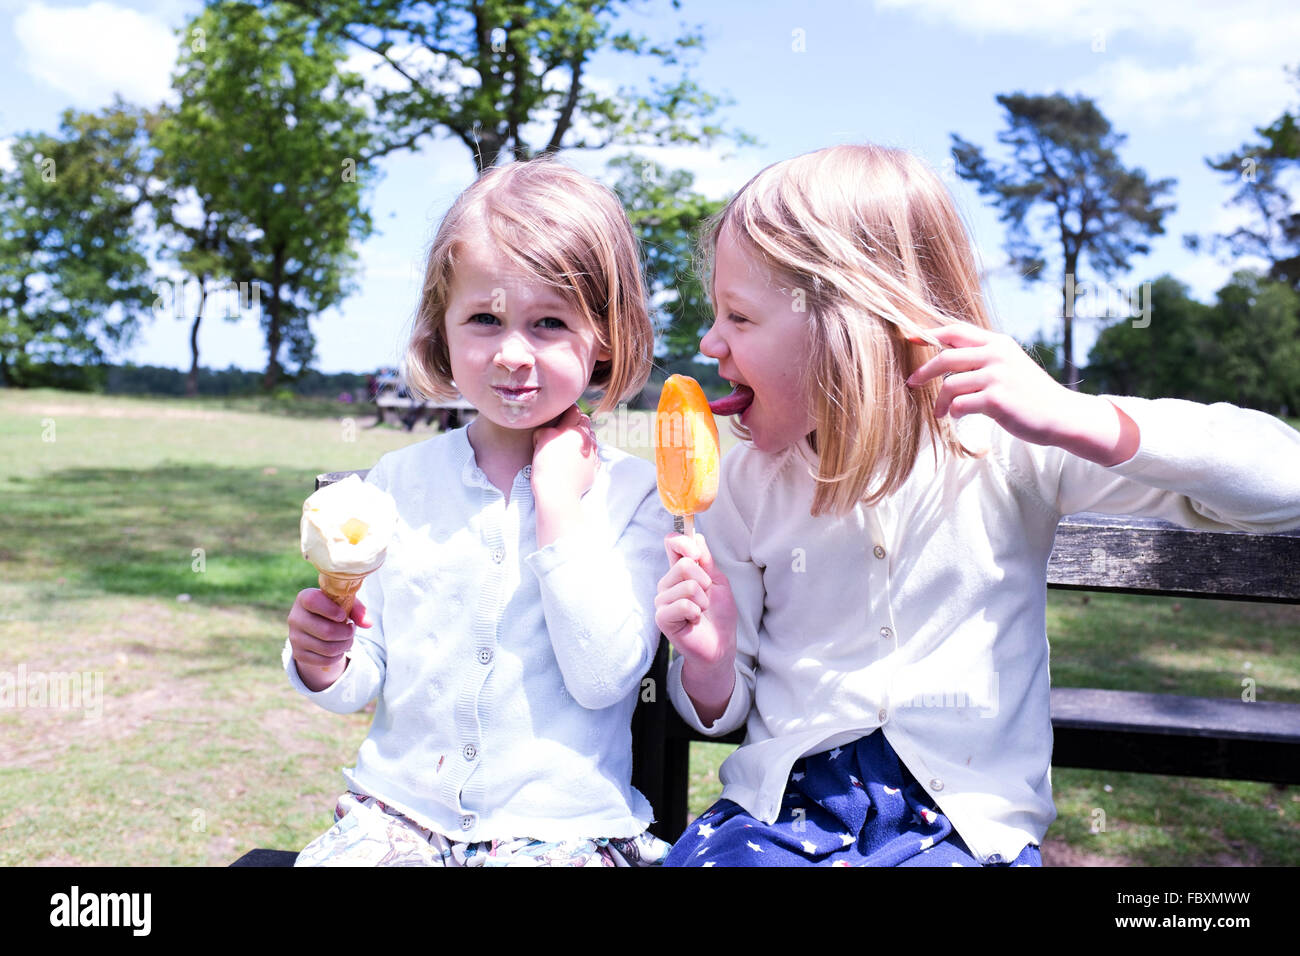 Sister day out with ice cream and lolly Stock Photo